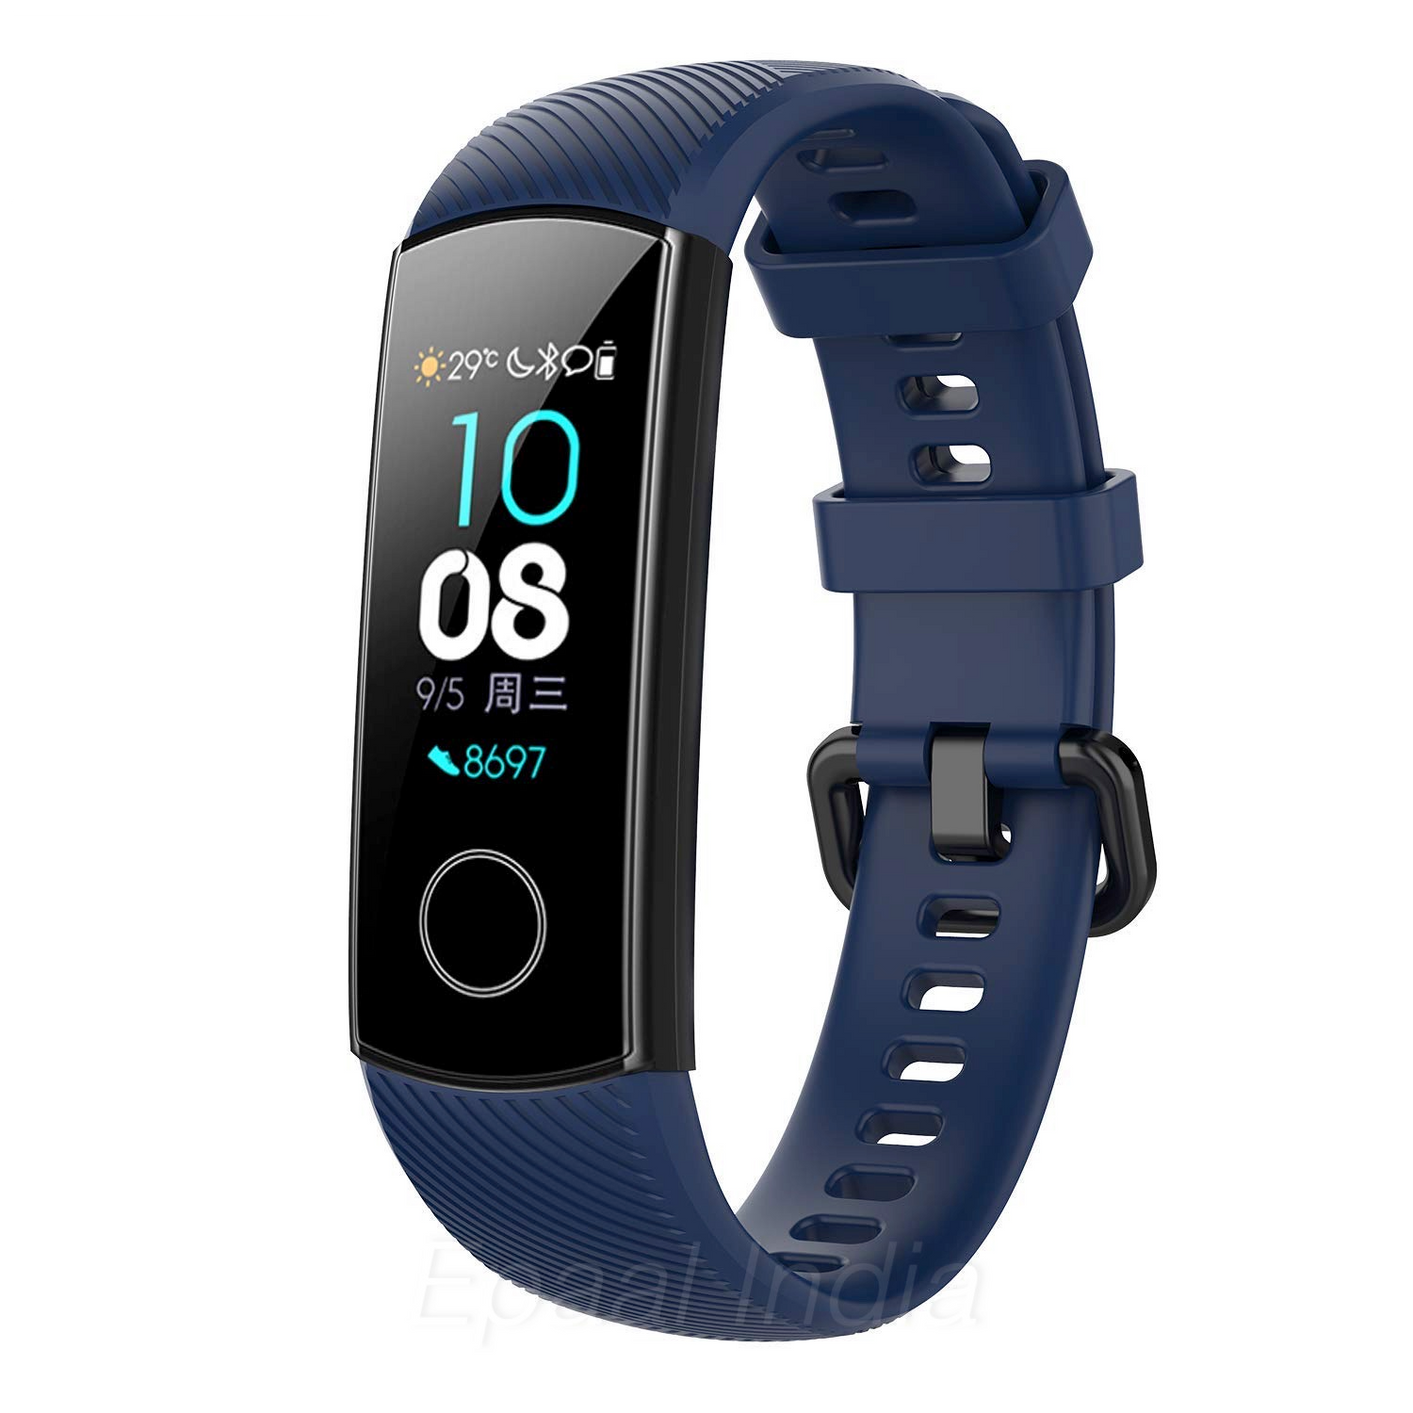 Honor Band 5 Sport: A cheaper fitness tracker is coming to